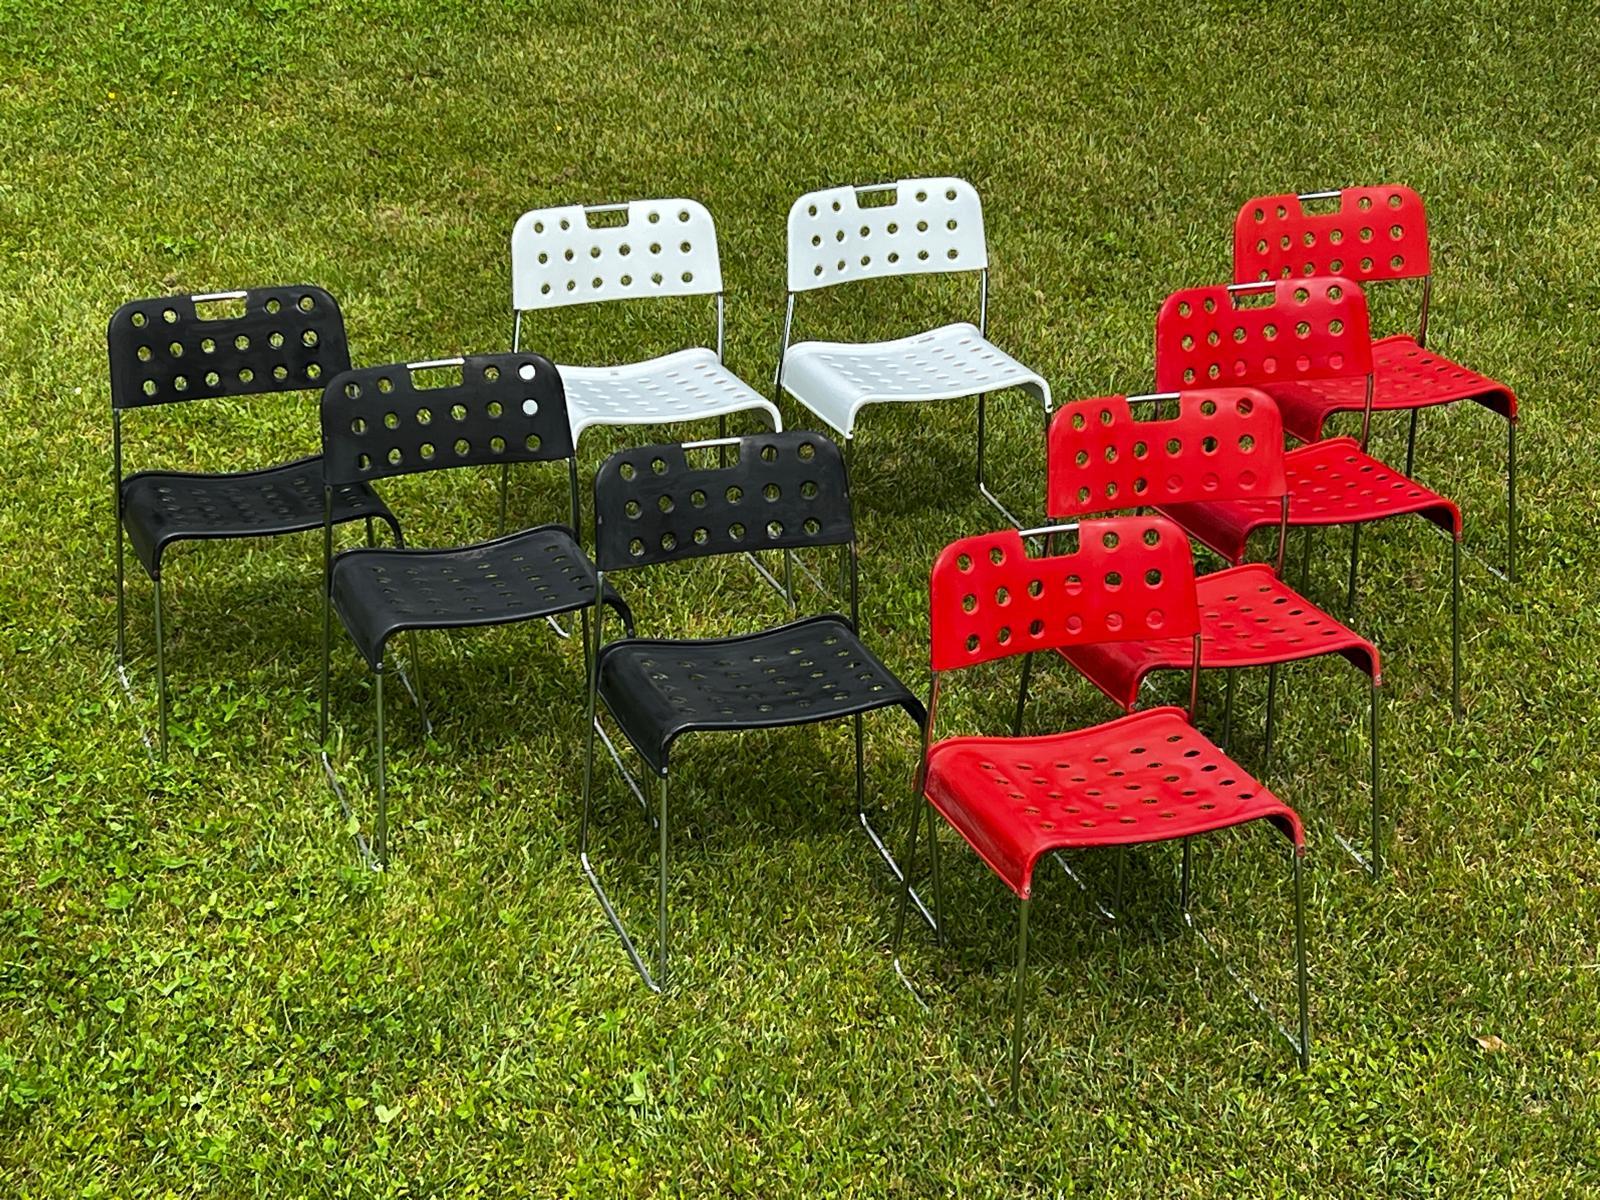 Mid-Century Modern Omstak chairs by Rodney Kinsman for Bieffeplast, 1960
Rodney Kinsman's ''Omstak'' chair produced by Bieffeplast in the 1960s in Italy.
Seat and back in lacquered and perforated metal fixed to a steel frame.
4 red and 3black  and 2